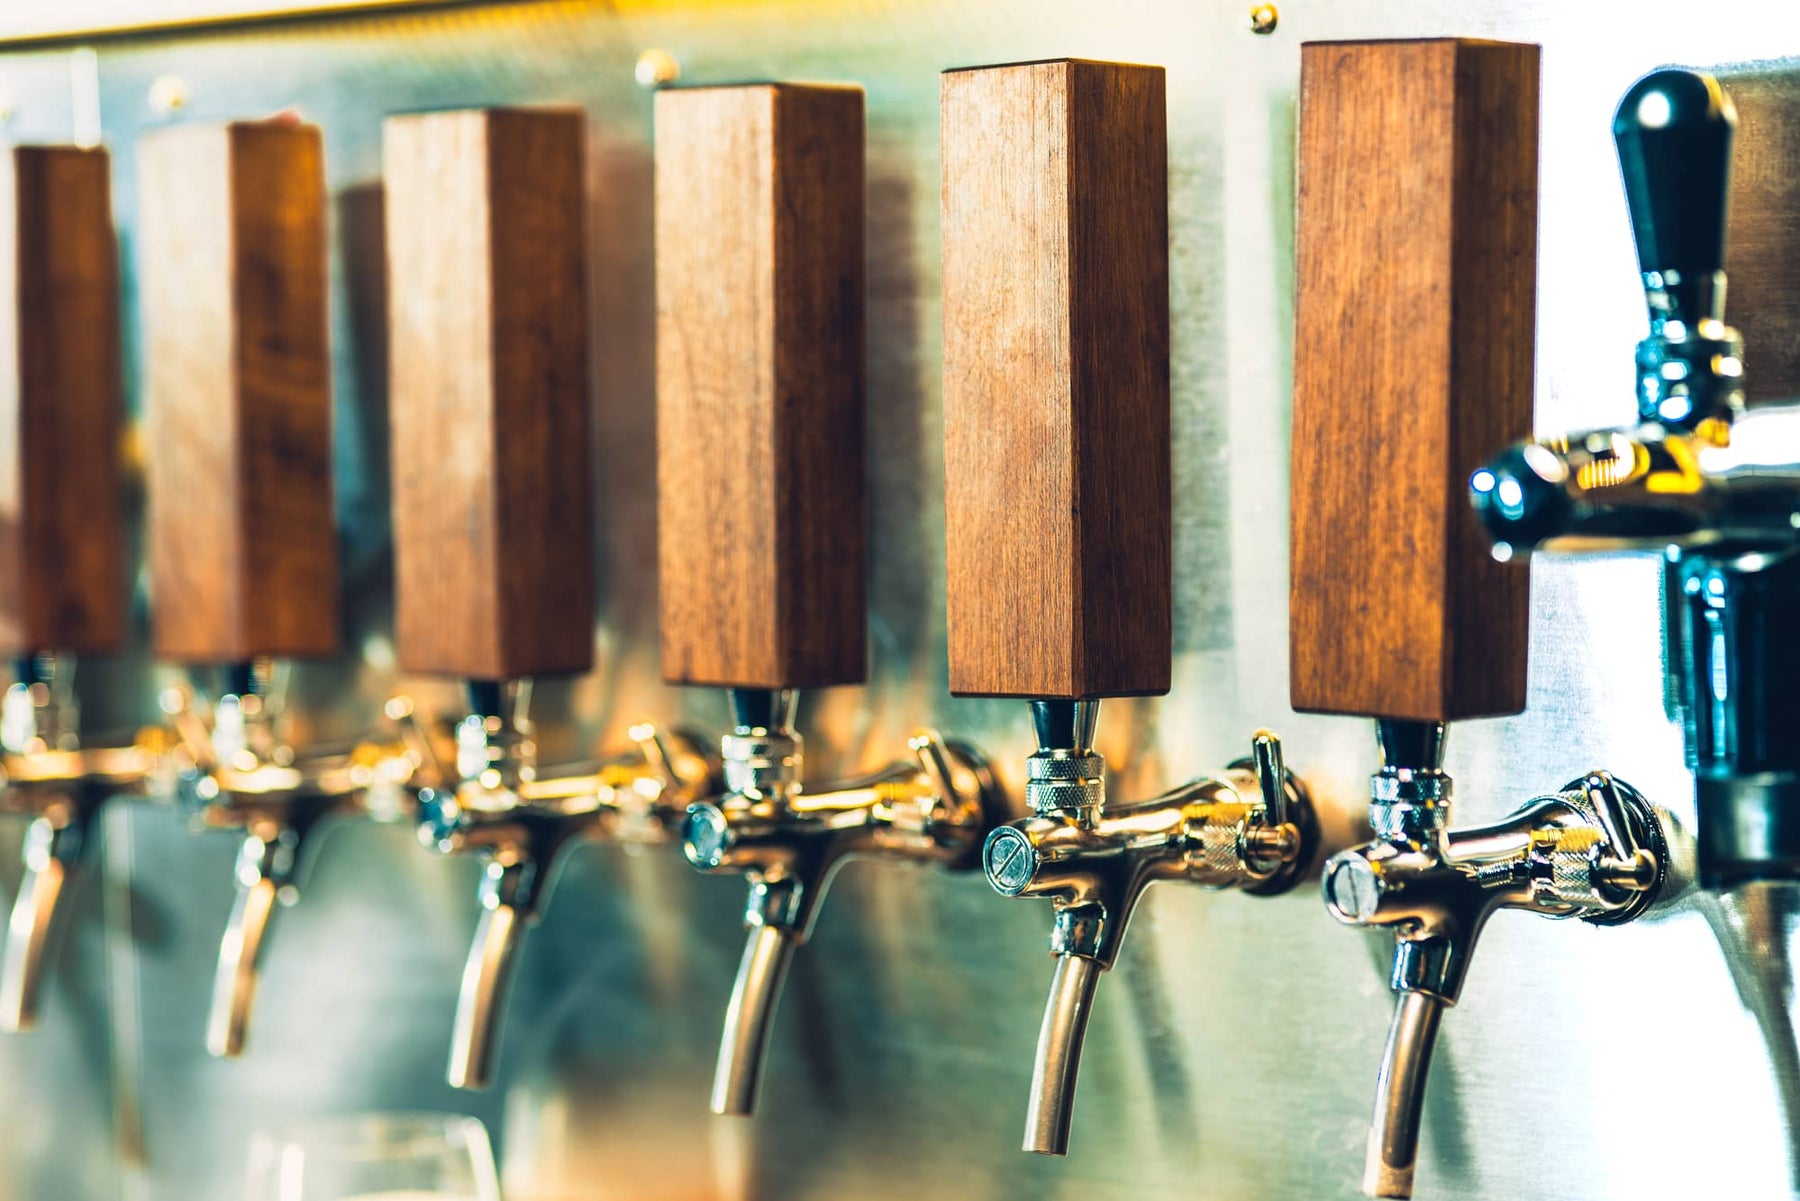 How to Make Your Own DIY Tap Handle: A Guide for Homebrewers